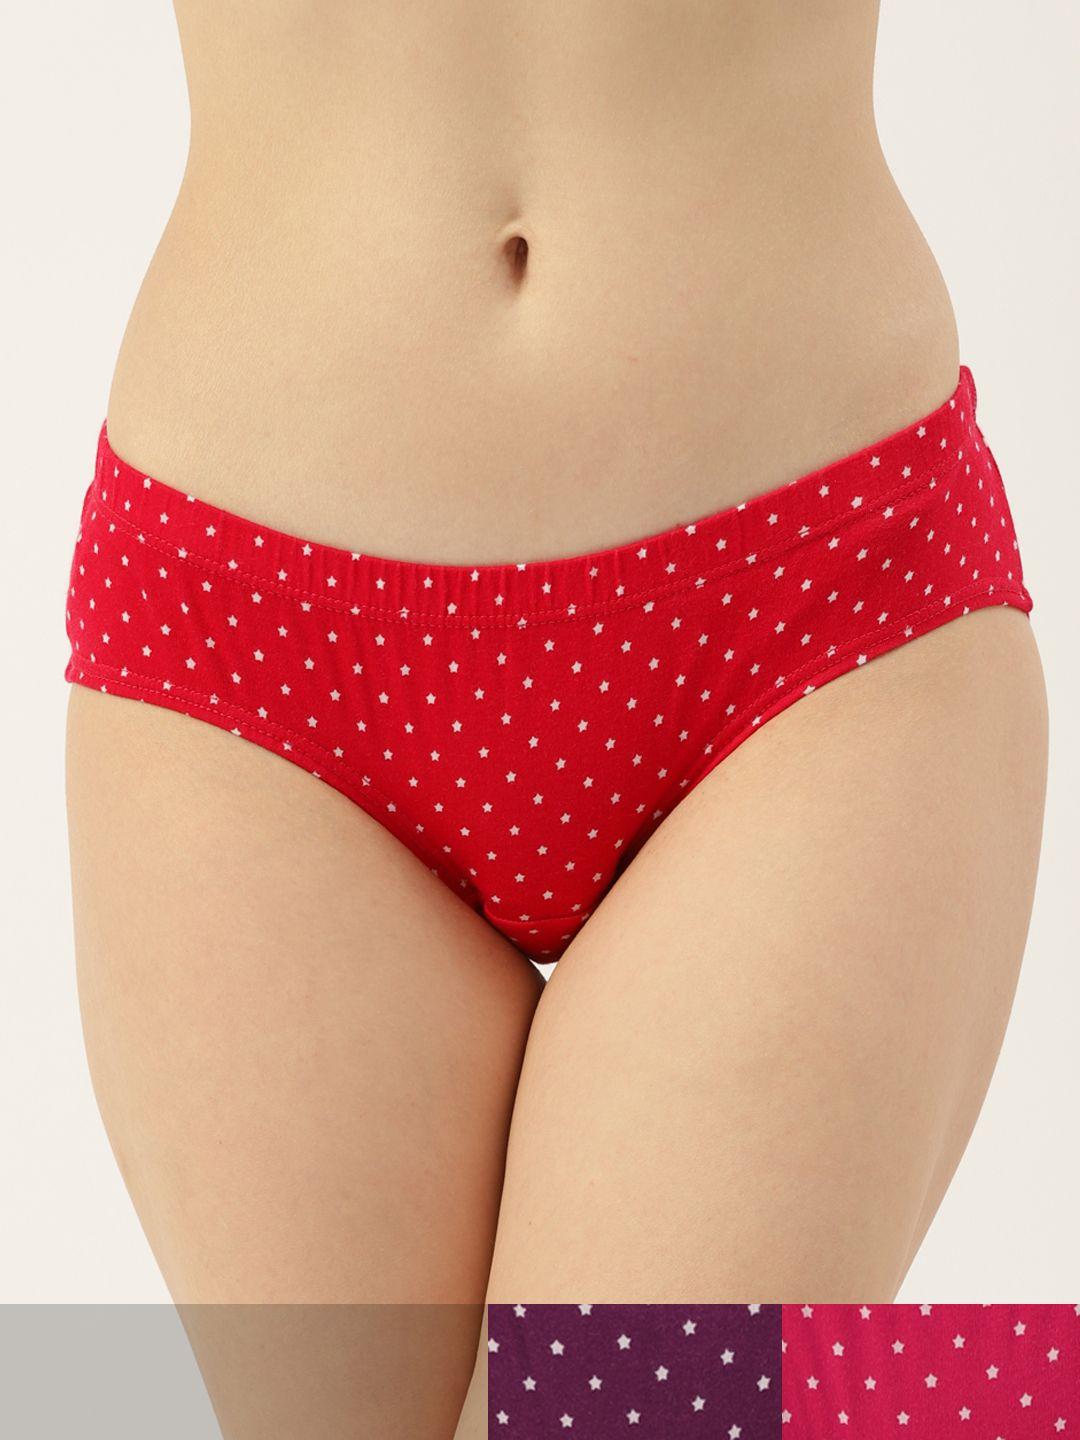 amosio women pack of 3 cotton polka dots print mid-rise hipster briefs hp-9019-3